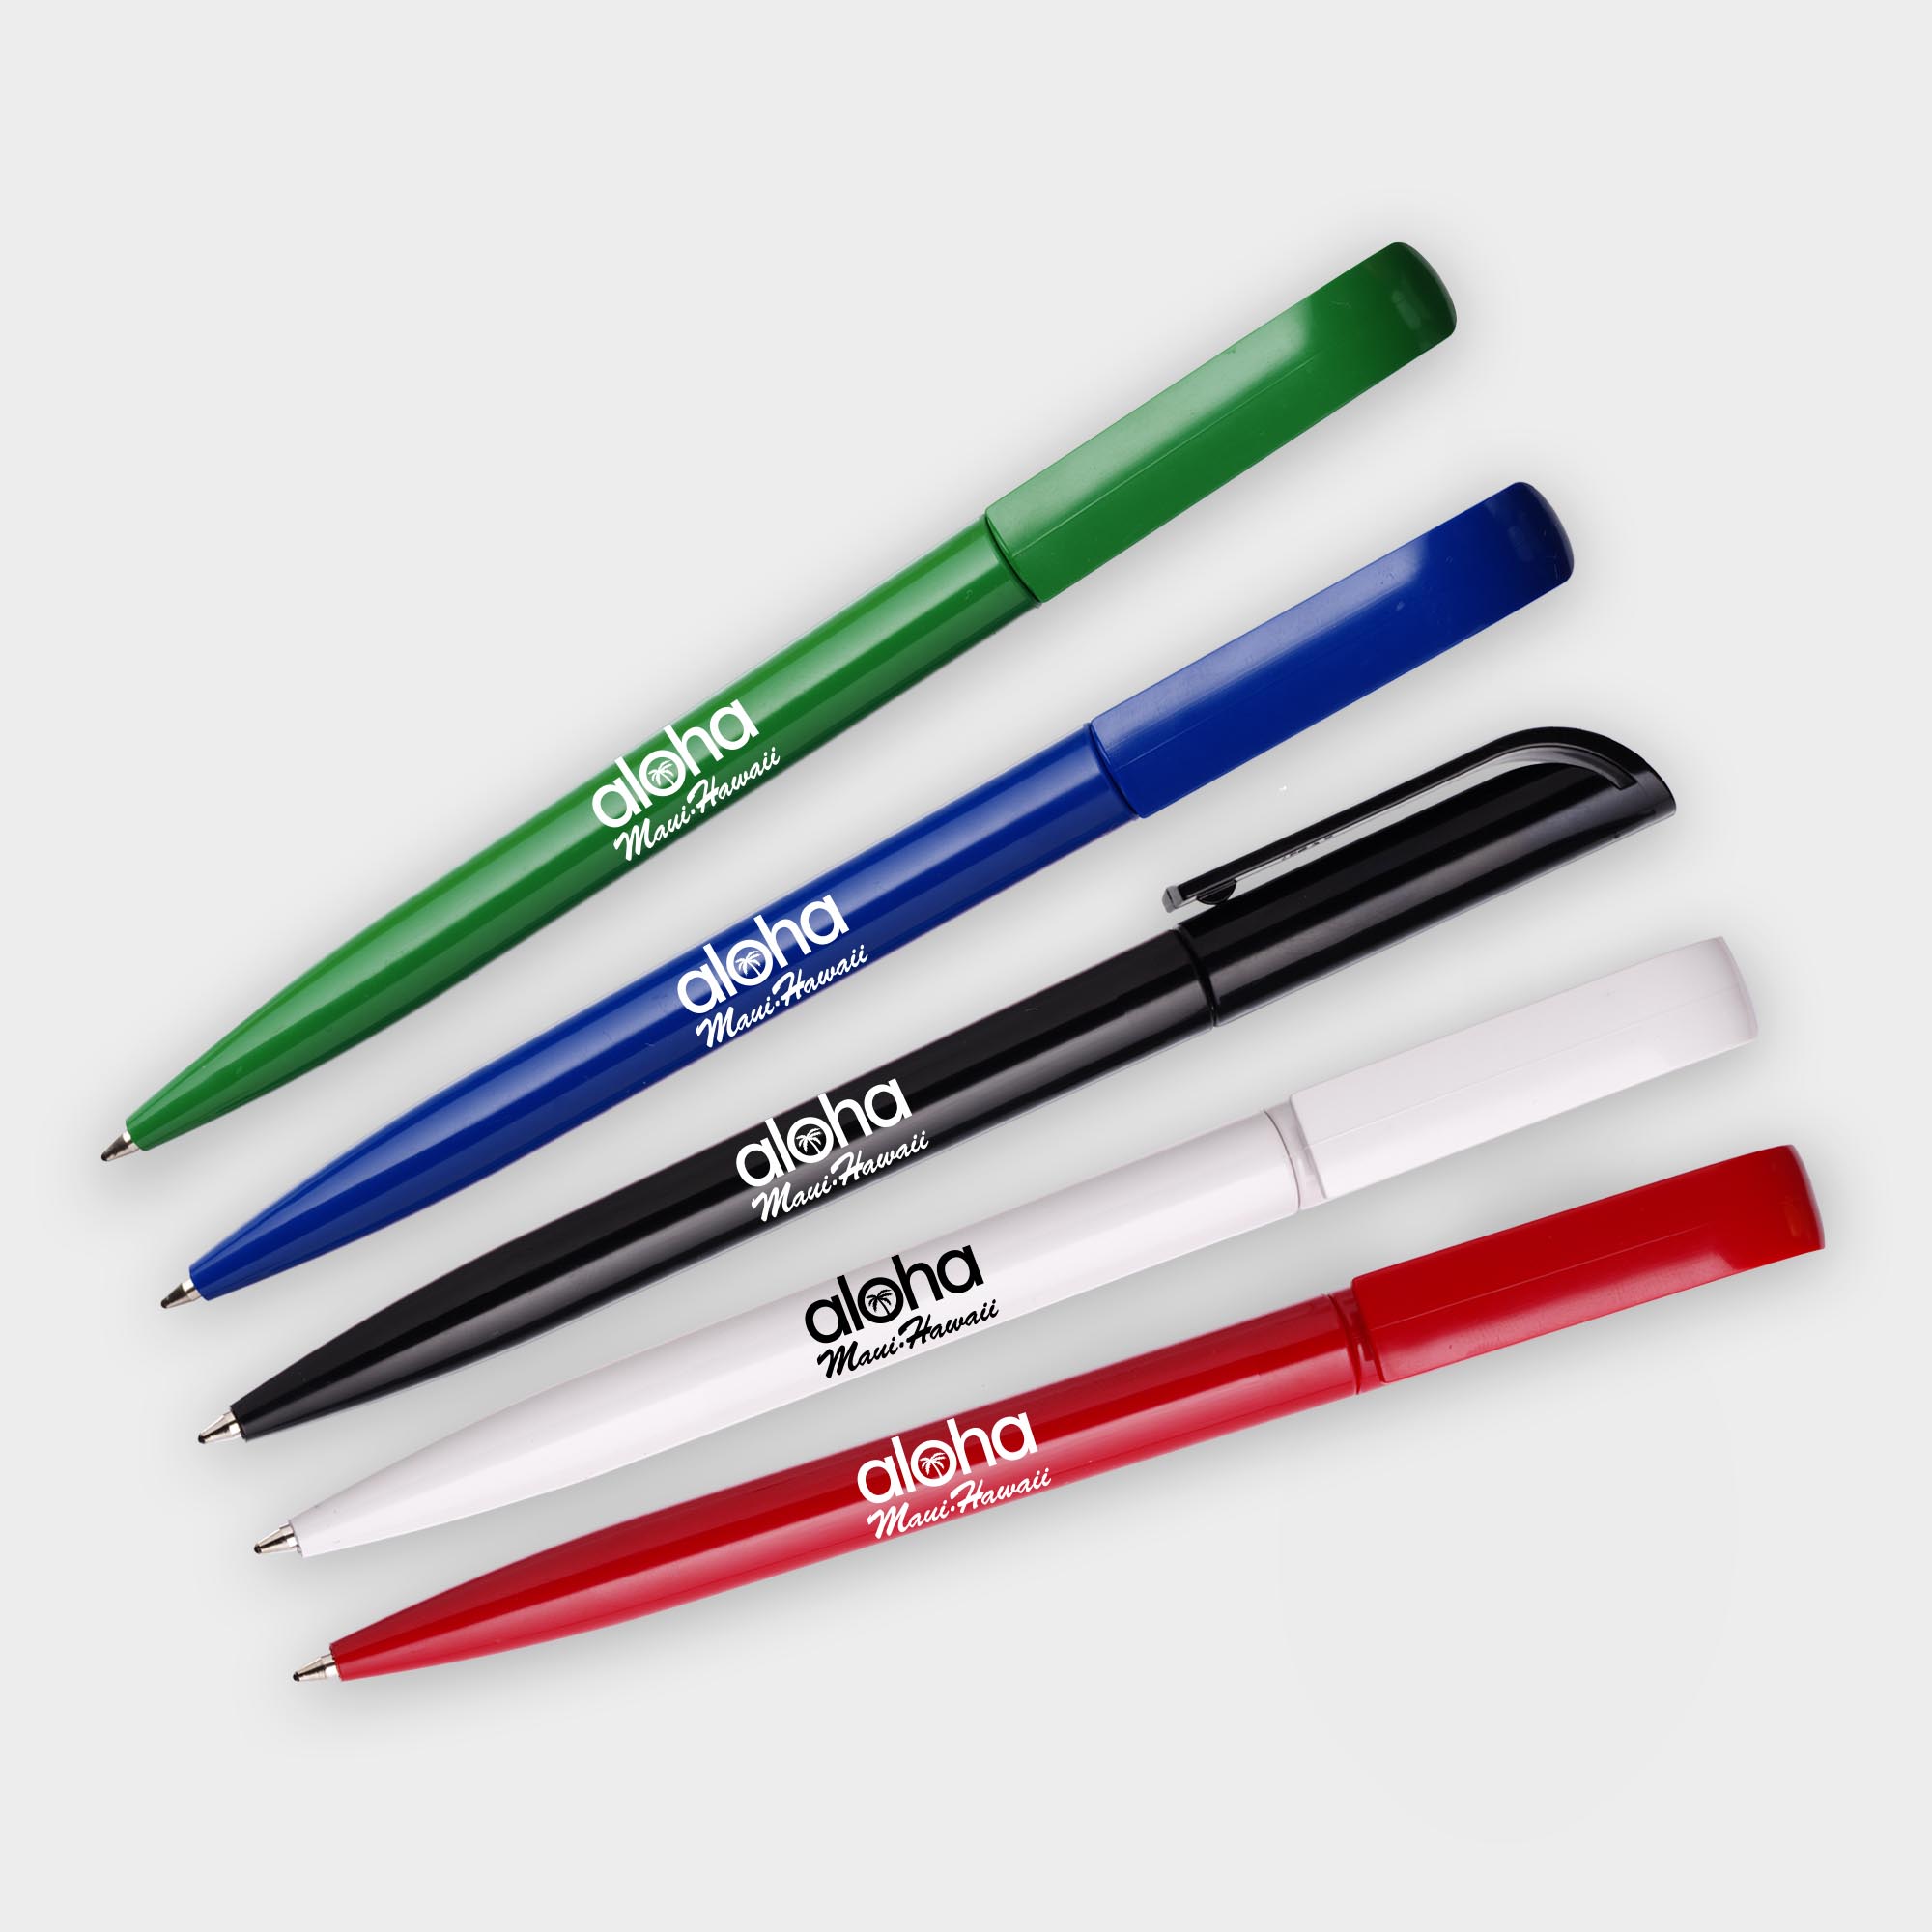 The Green & Good Eclipse Pen made from recycled CD cases. Twist action retractable pen, available in a variety of colours. Black ink as standard.